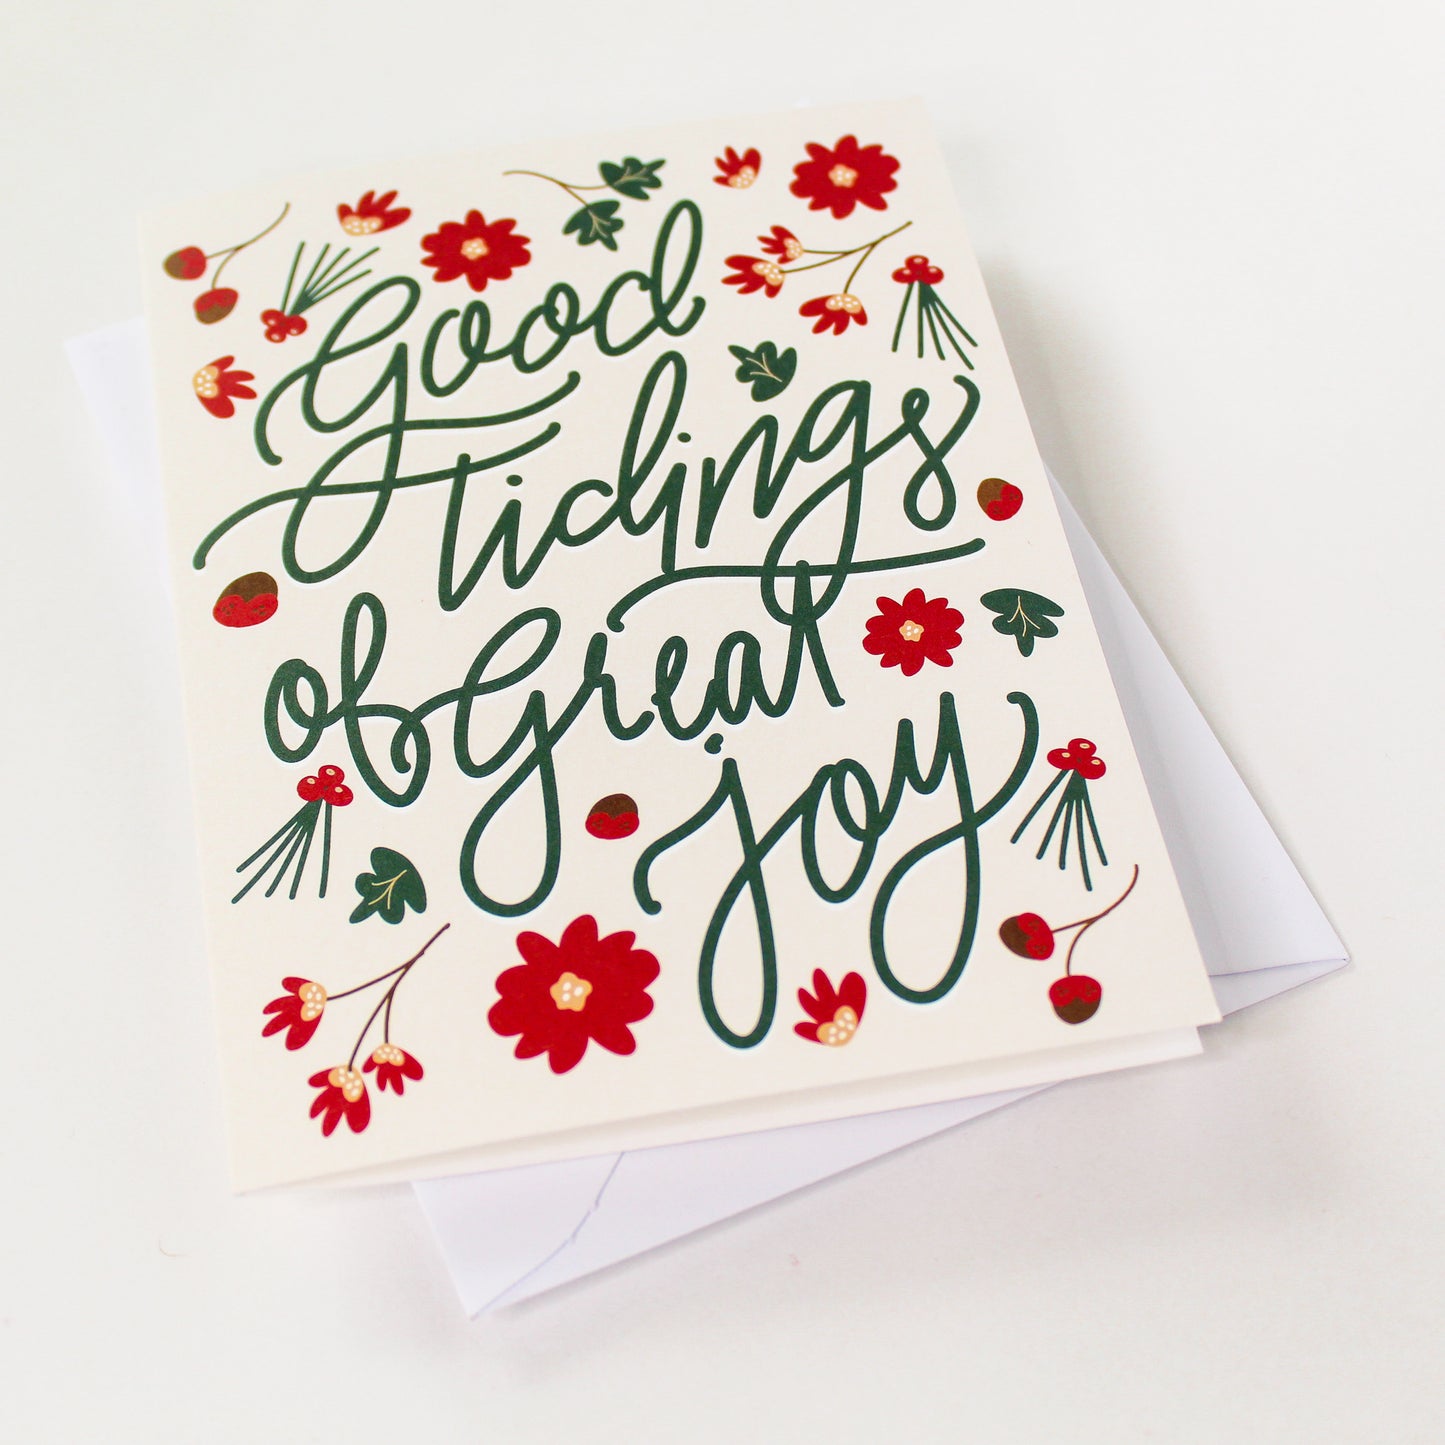 "Good Tidings of Great Joy" Christmas Greeting Card is a festive way to bring joy during the holiday season. Each card is folded to 4.25" tall by 5.5" wide, is blank inside and comes with a matching white envelope. Cards are packaged in cellophane sleeves. 